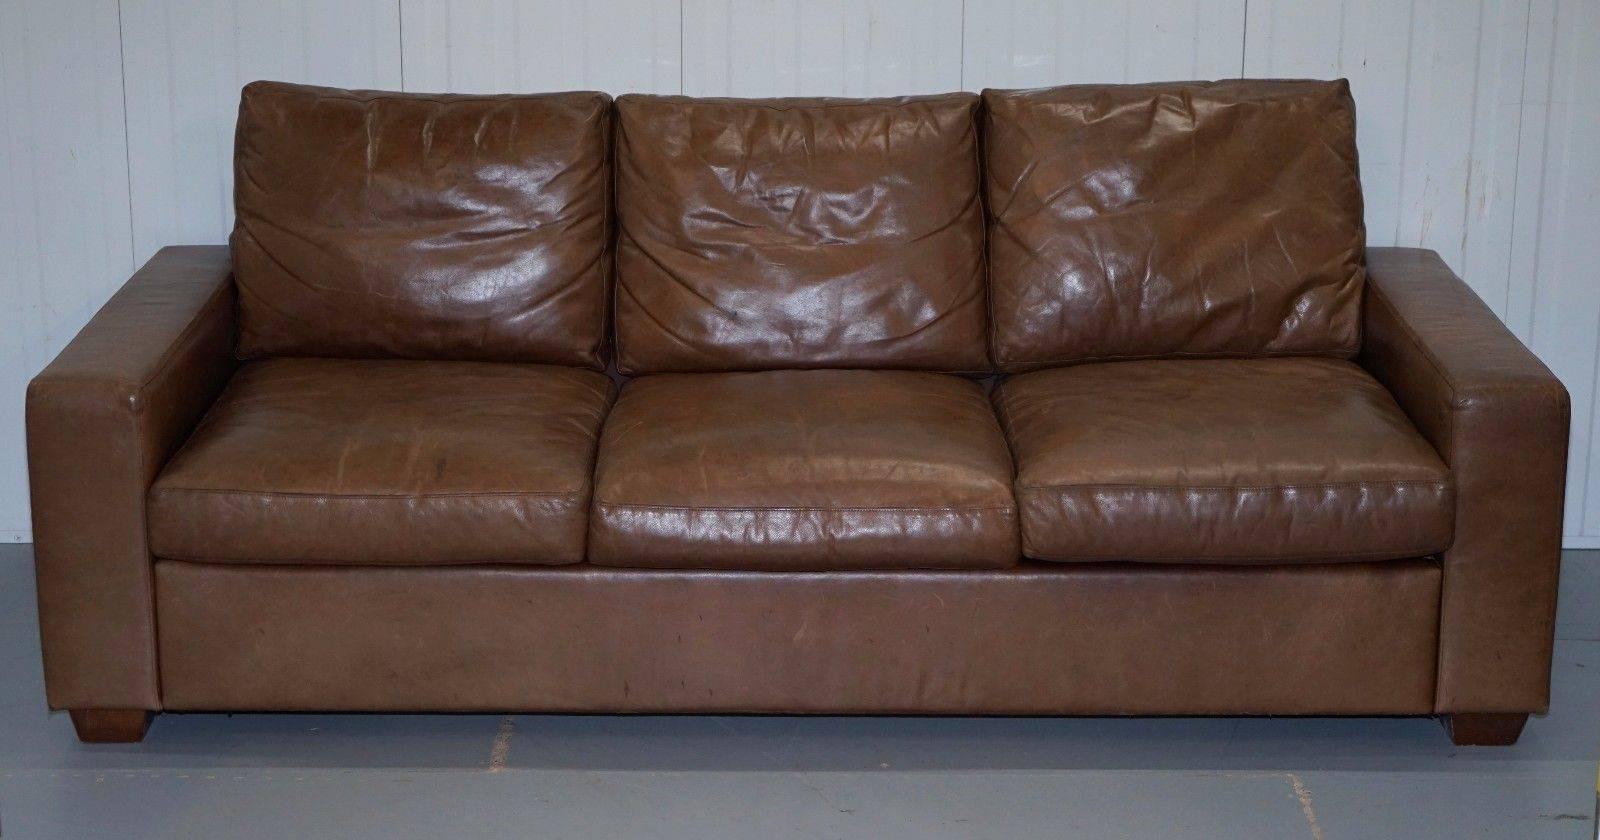 We are delighted to offer for sale this extremely rare contemporary four seater aged brown leather club sofabed

Please note the delivery fee listed is just a guide, for an accurate quote please send me your postcode and I’ll price it up for you

A